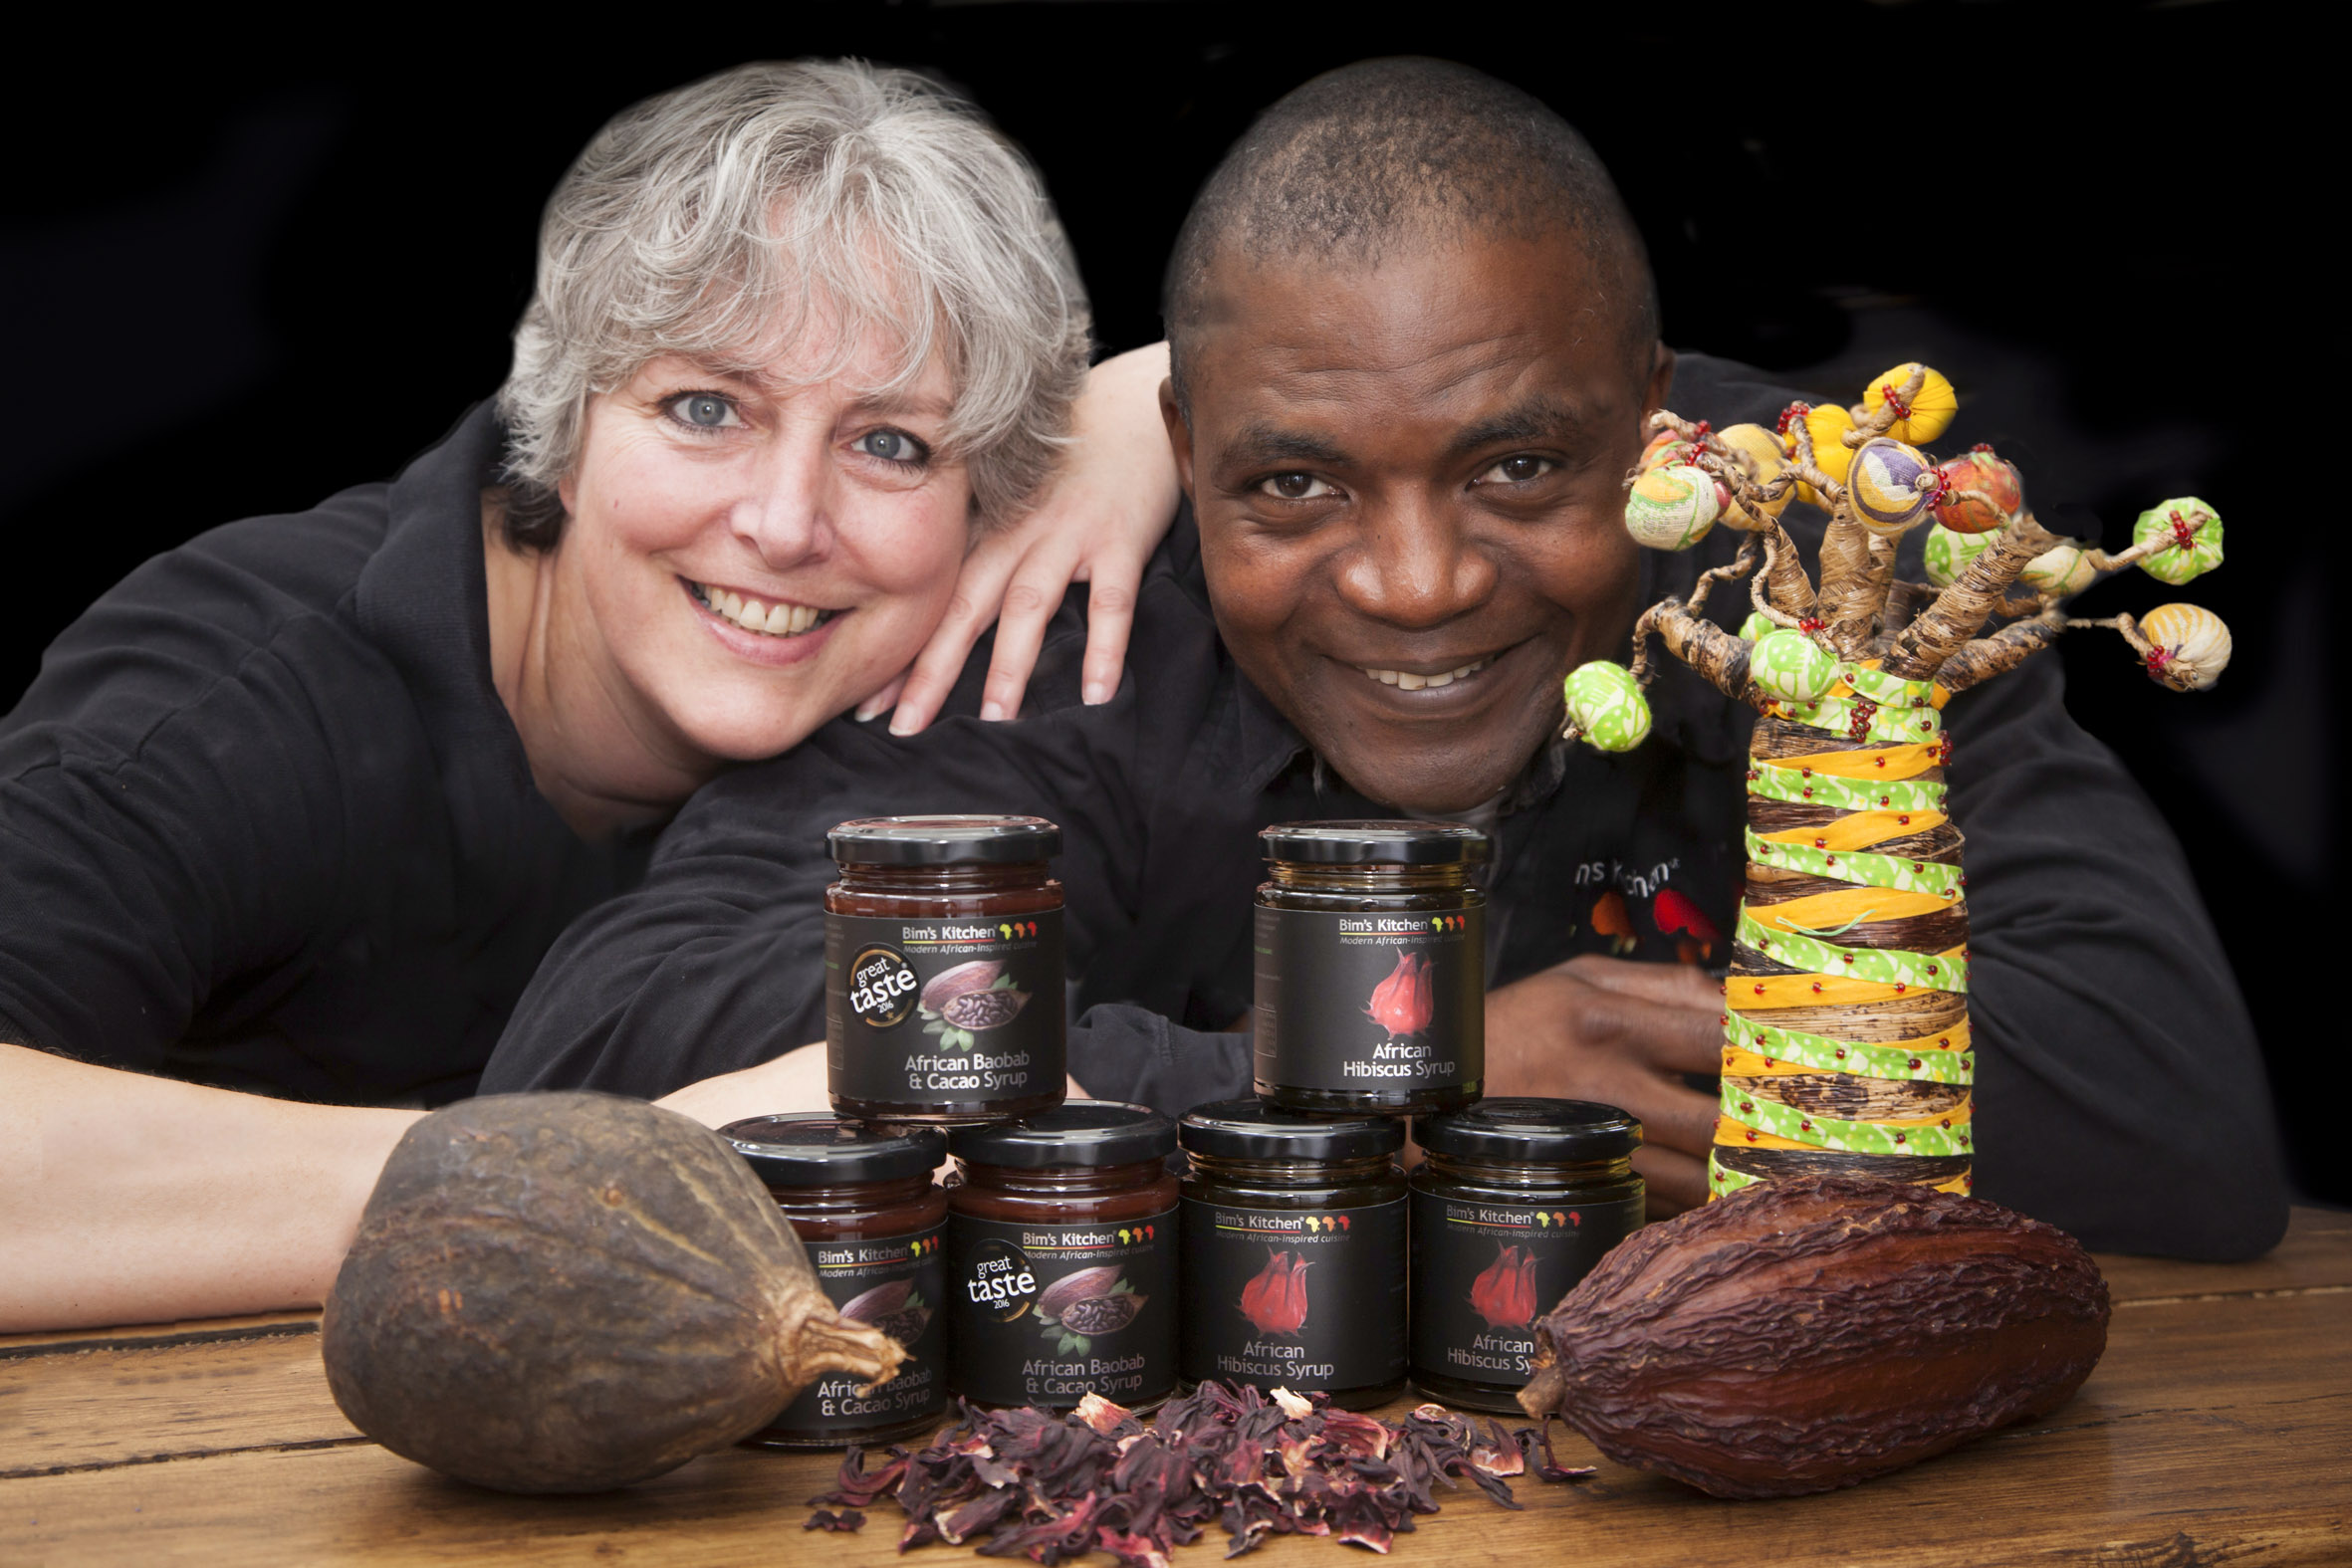 Welsh sauce firm turns up heat with exotic new desert range